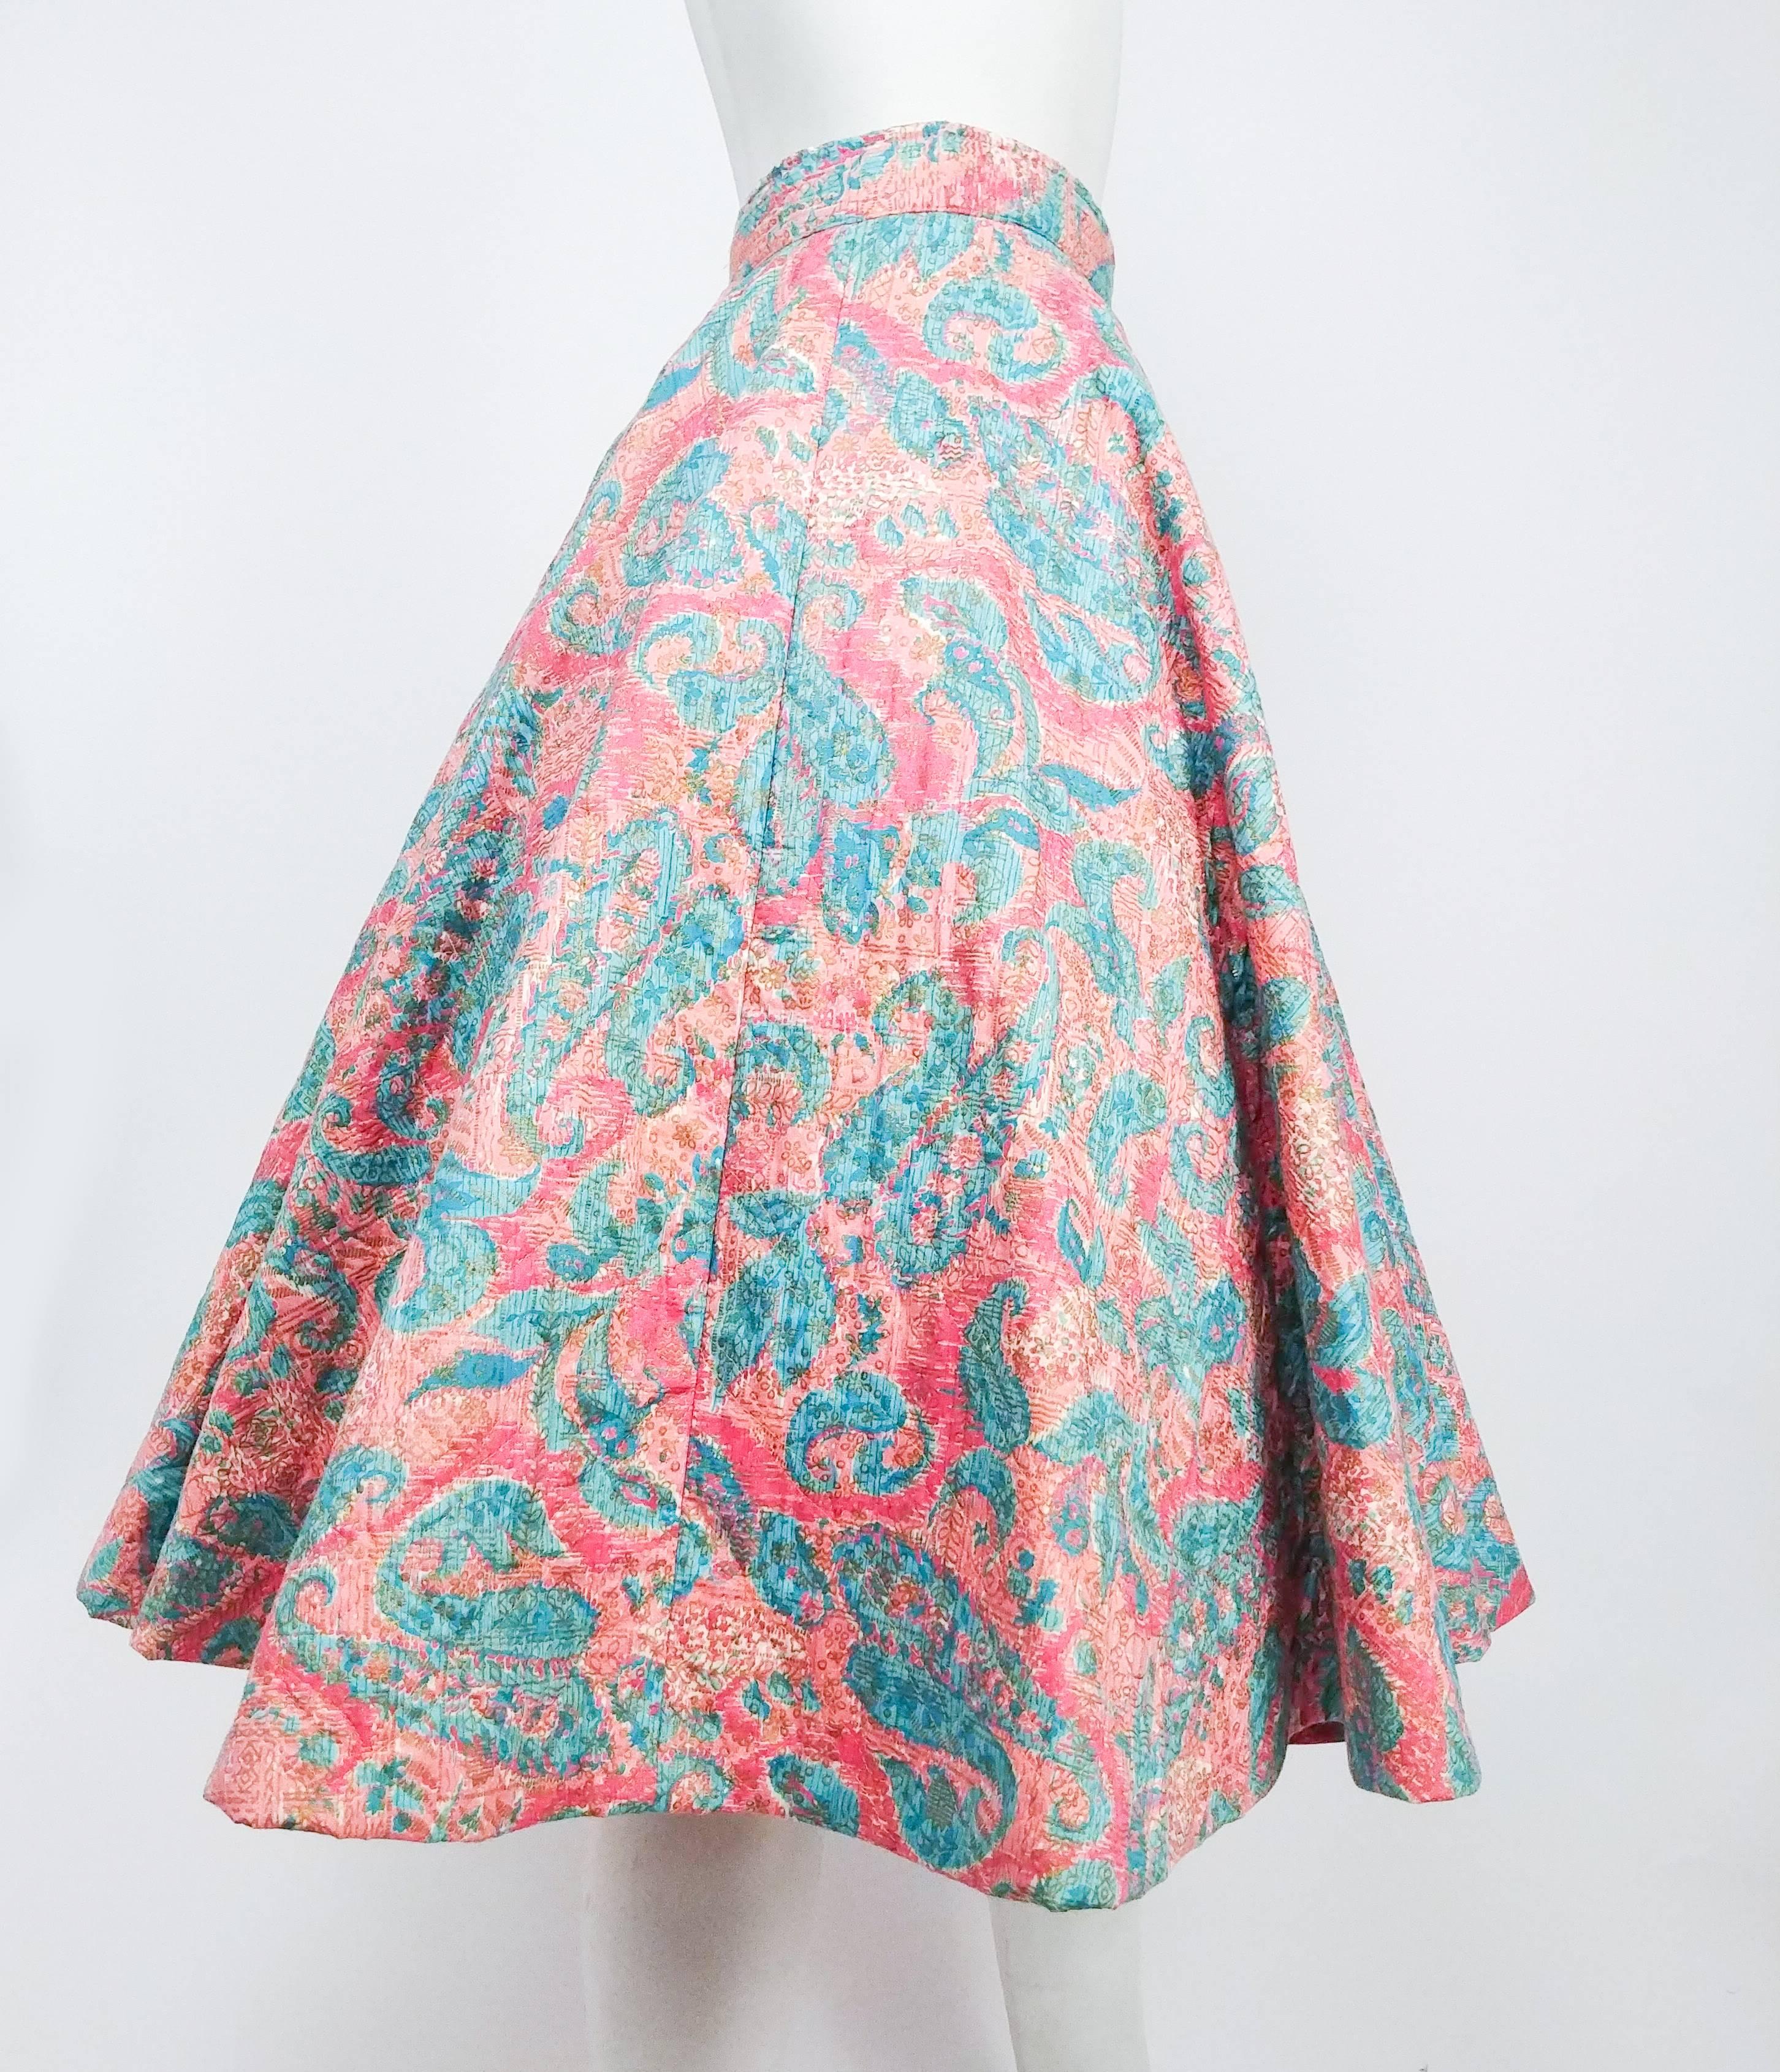 1950s Quilted Cotton Print Circle Skirt. Blue and pink printed cotton fabric with gold painted overlay. Thick, supported feel due to quilting. Button and zipper closure at side. Skirt is shot on petticoat in photo. 